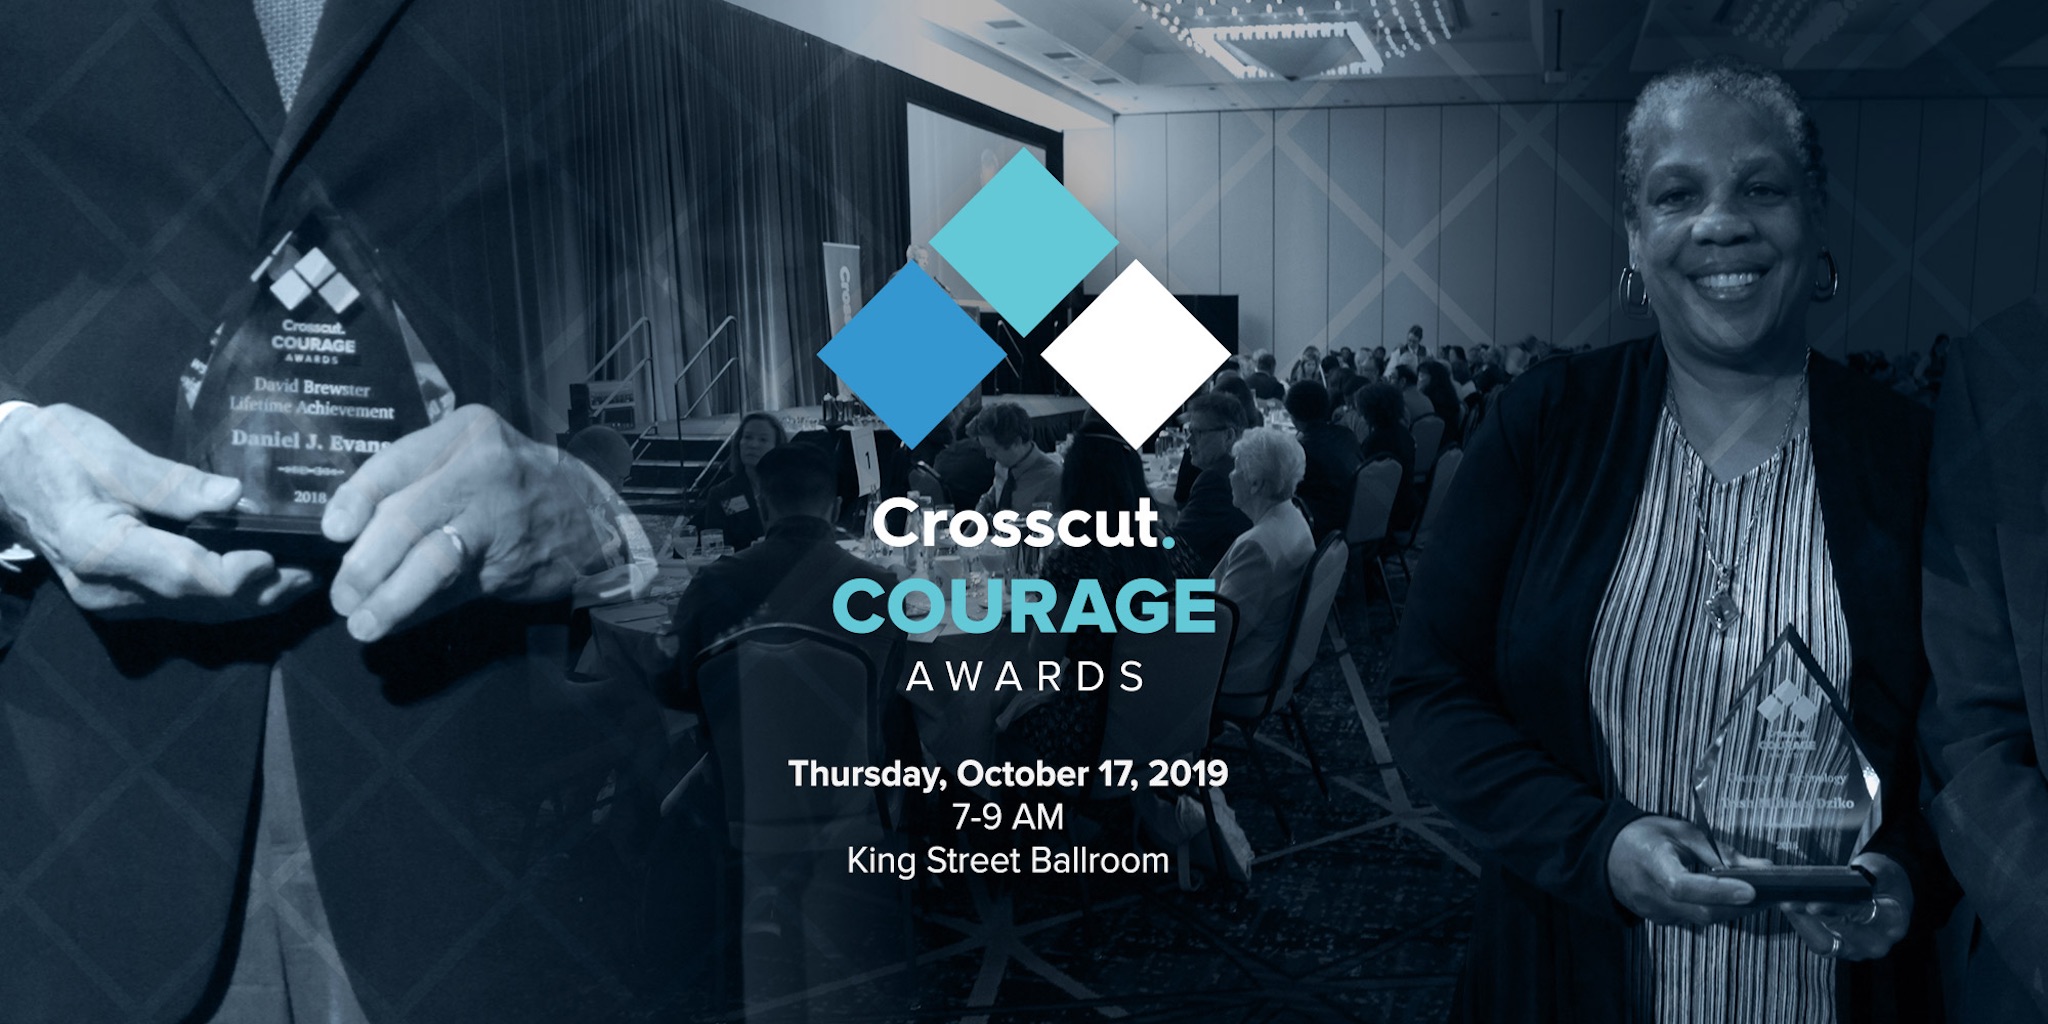 Photo of Crosscut courage awards with date and time of event pictured